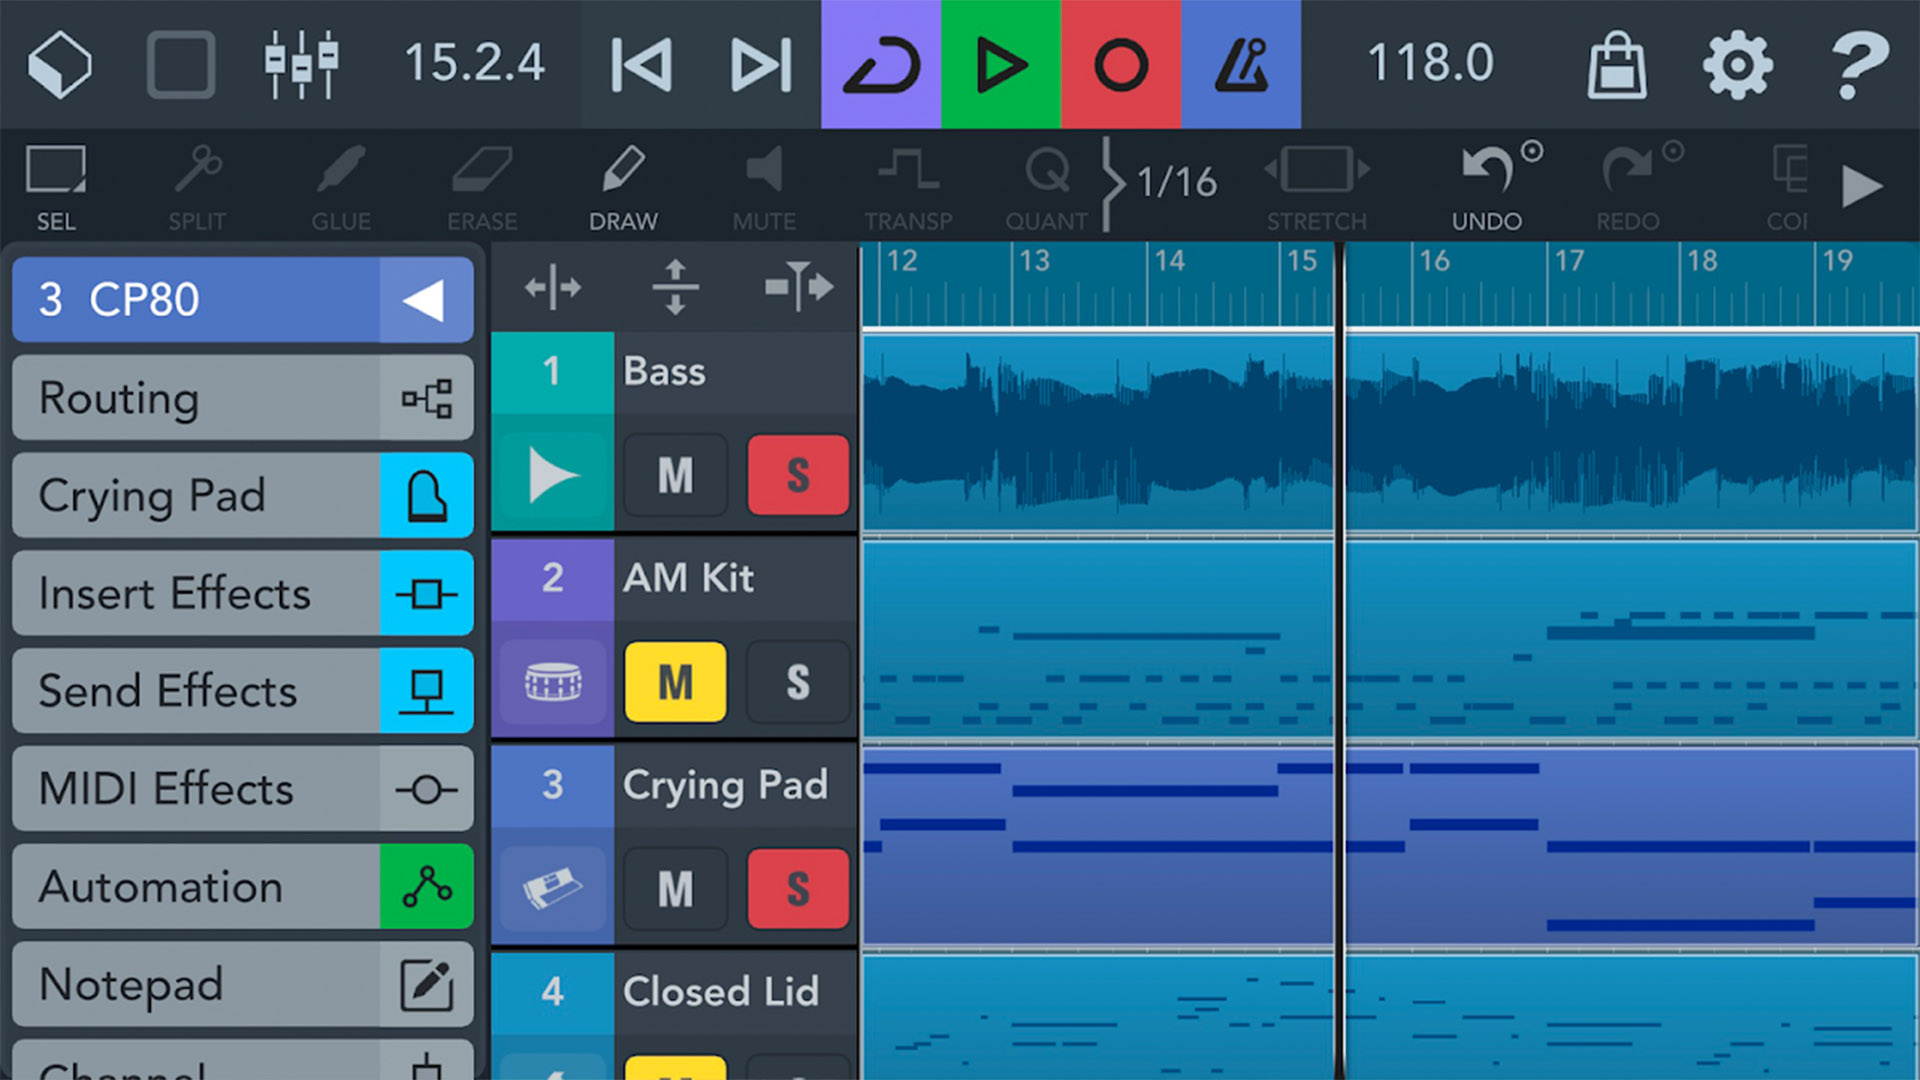 Android Apps Weekly - Cubase LE 3